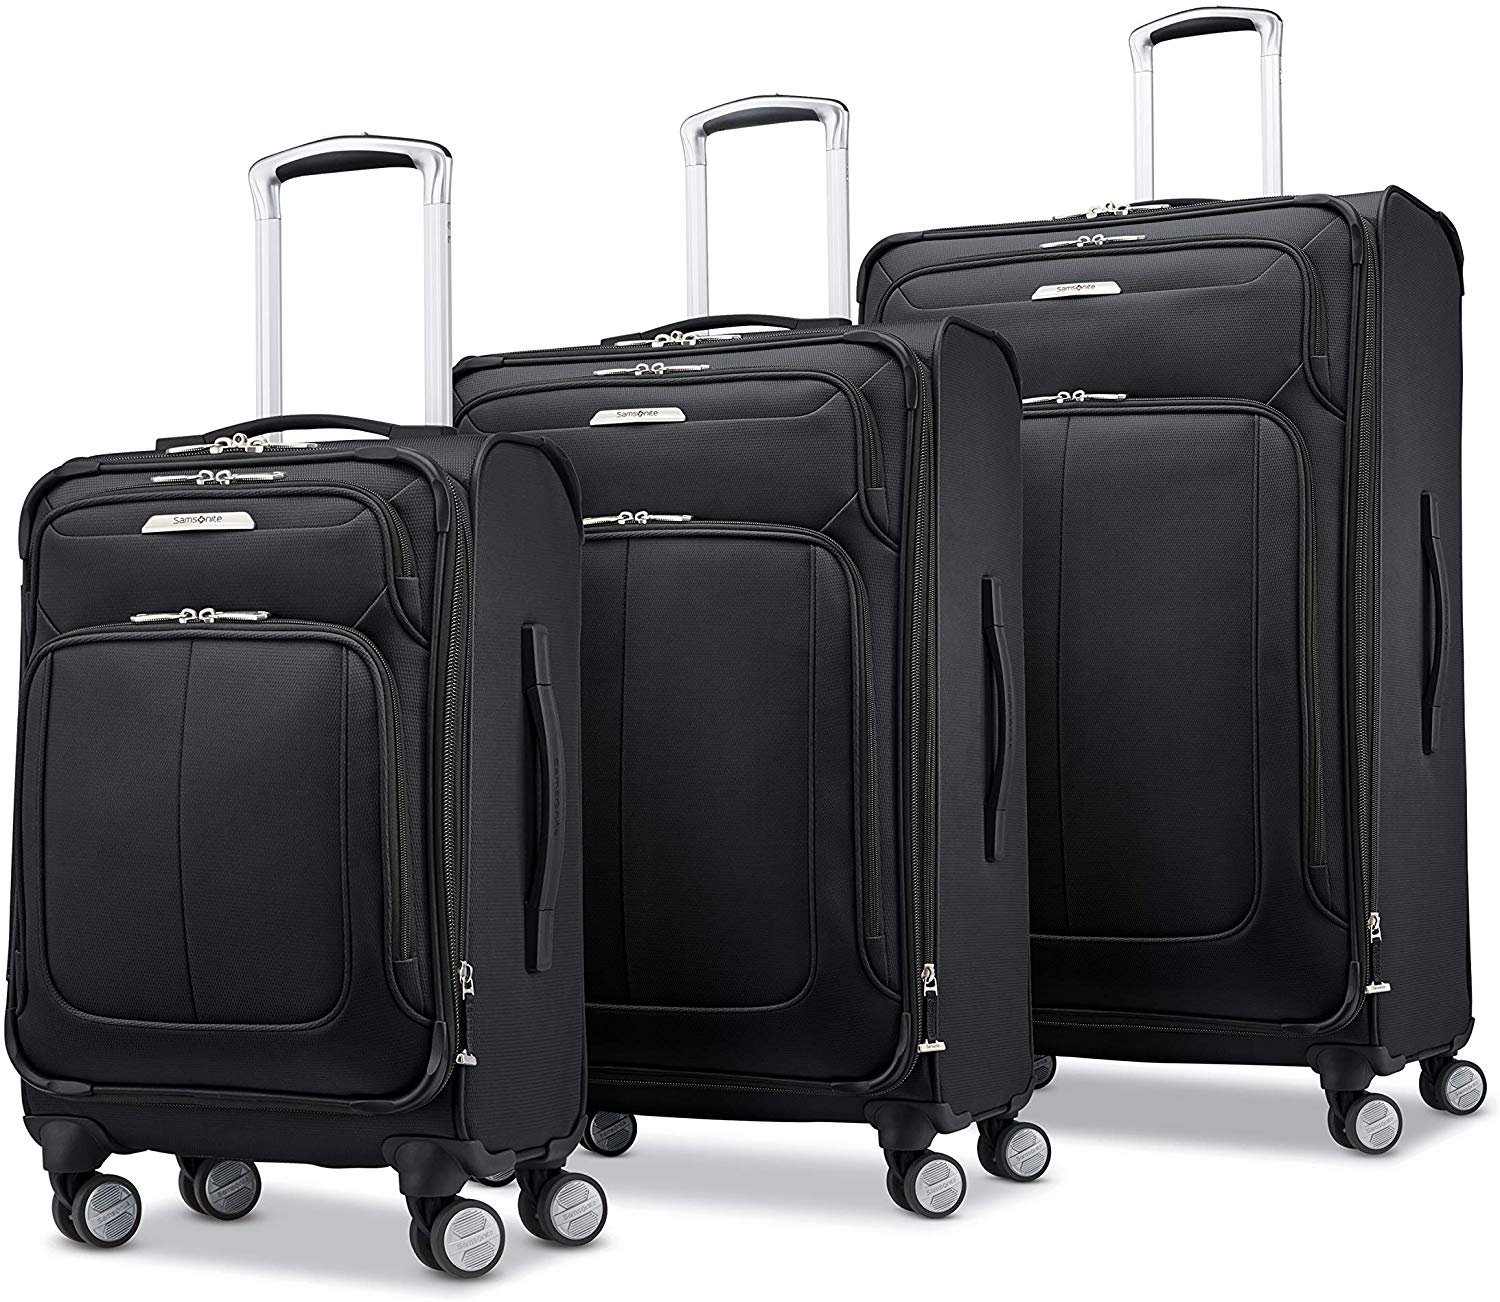 ABS vs polycarbonate luggage - The top 6 luggage reviewed - Product ...